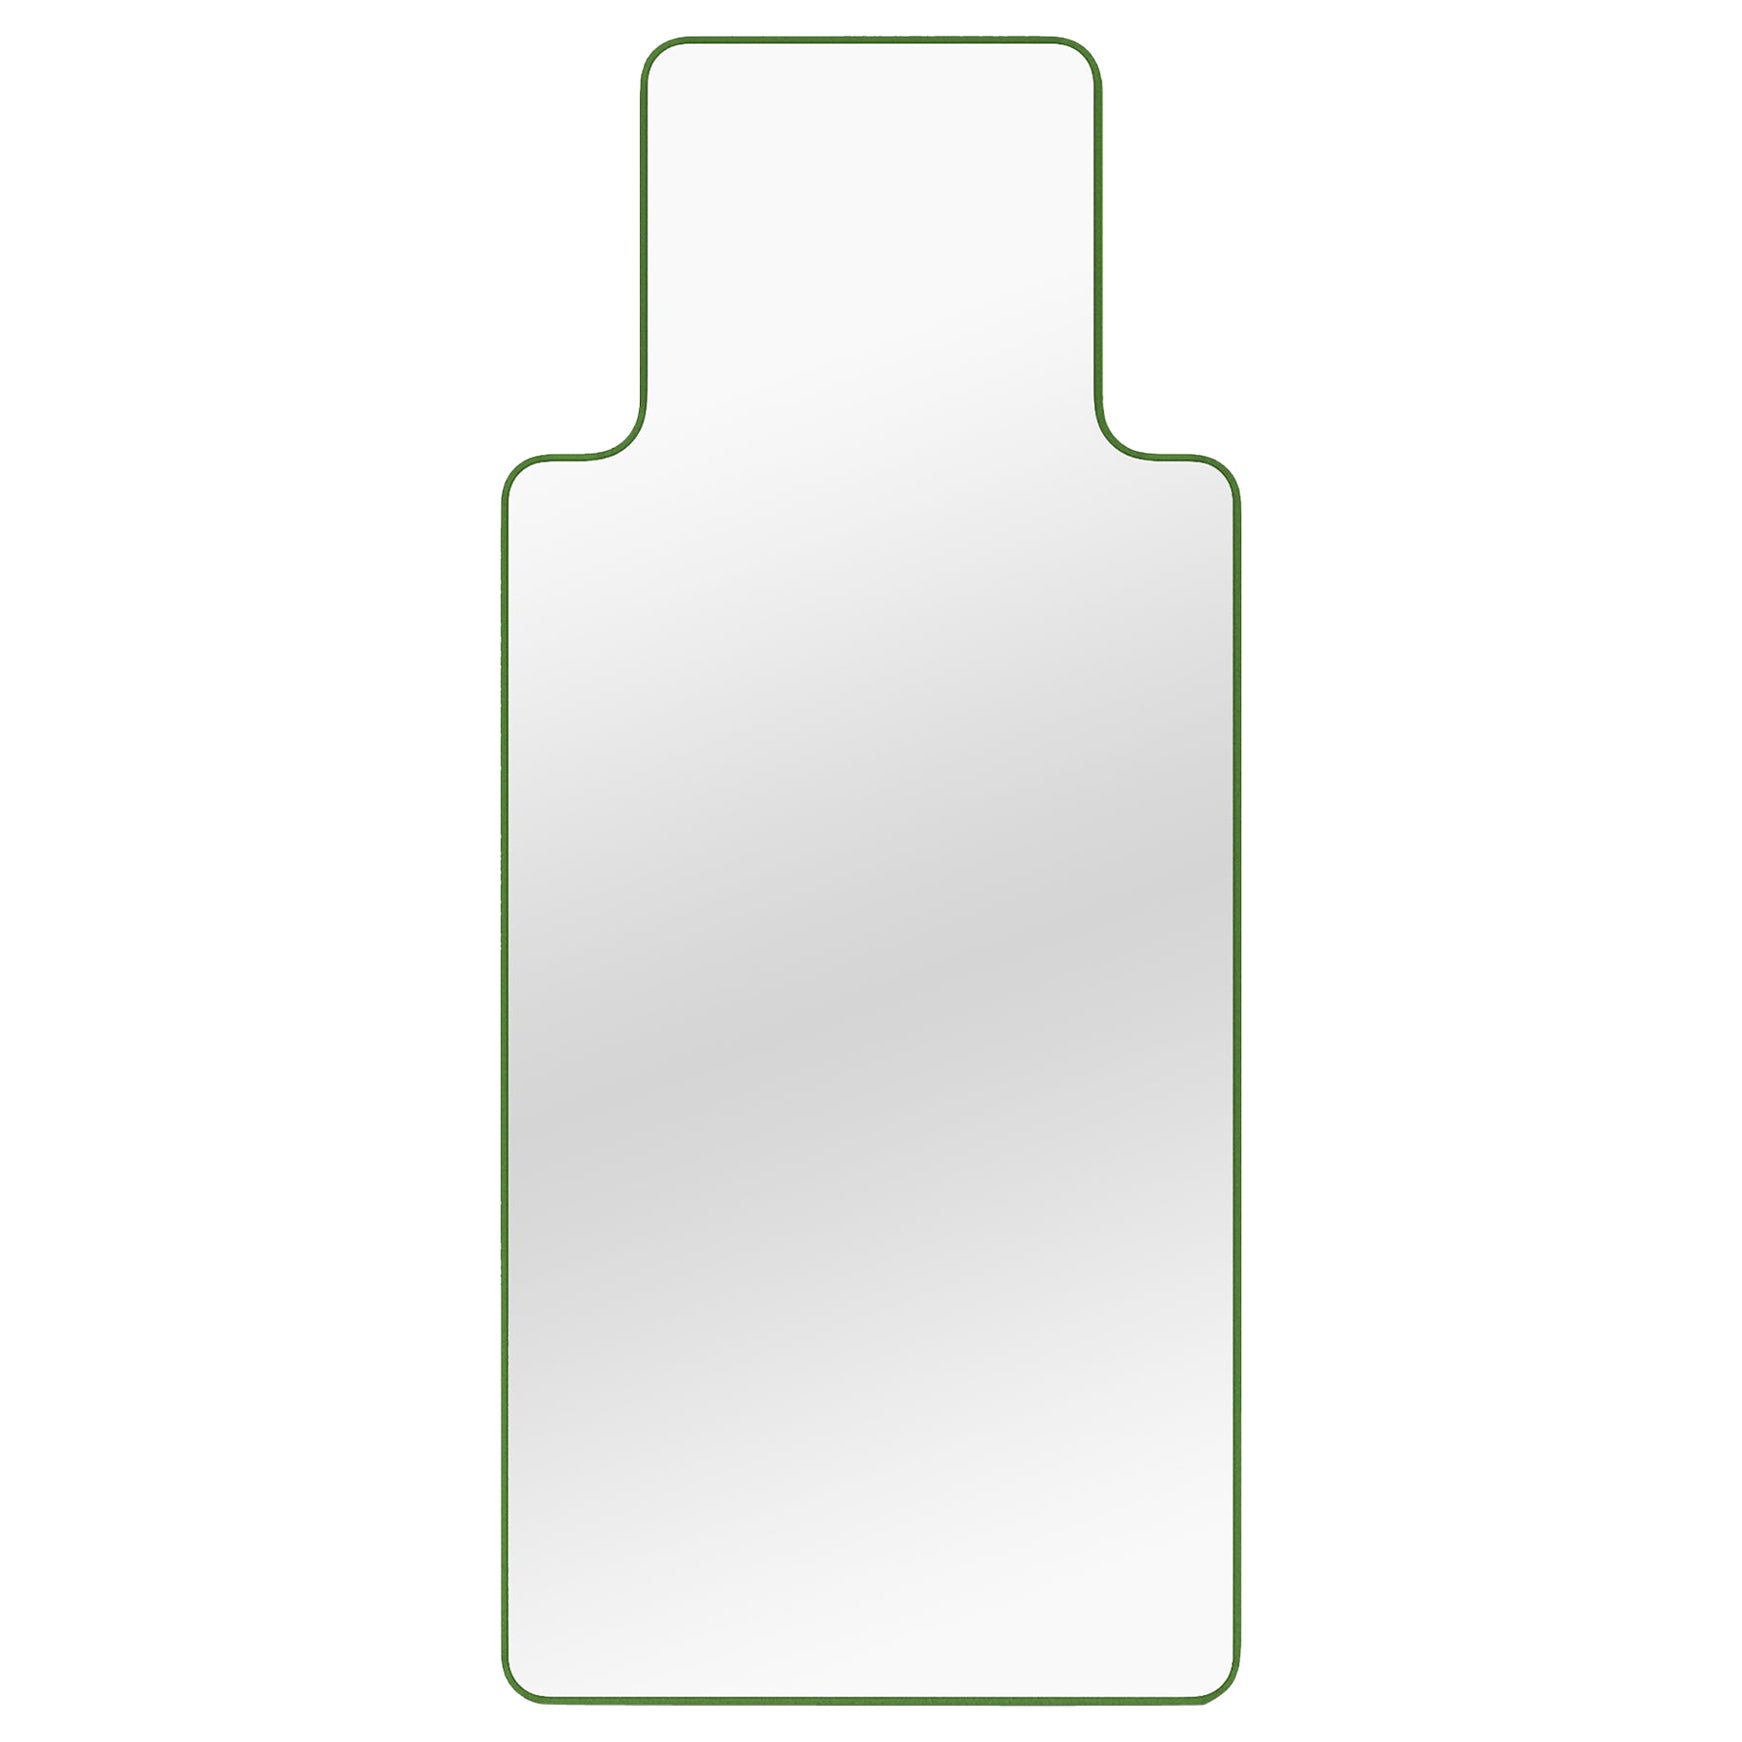 Contemporary Mirror 'Loveself 02' by Oitoproducts, Green Frame For Sale